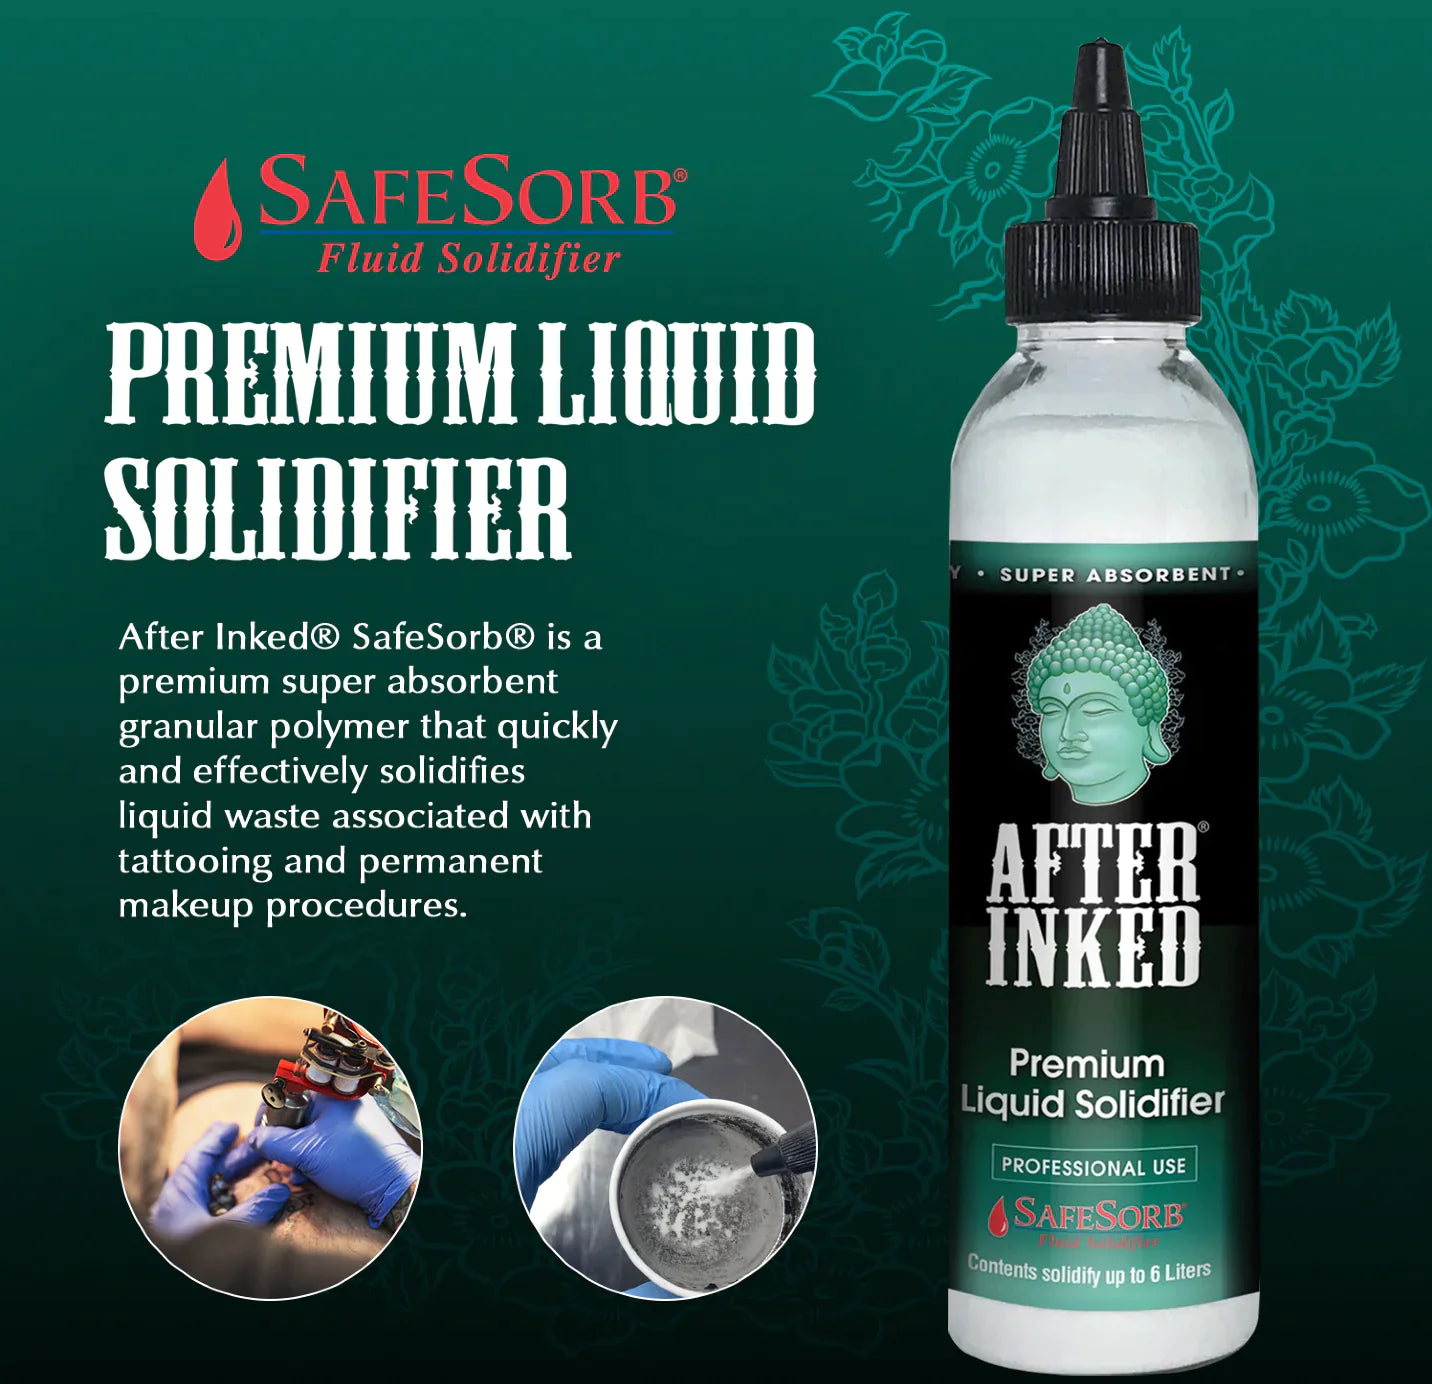 After Inked Premium Liquid Solidifier by Toronto Brow Shop with info